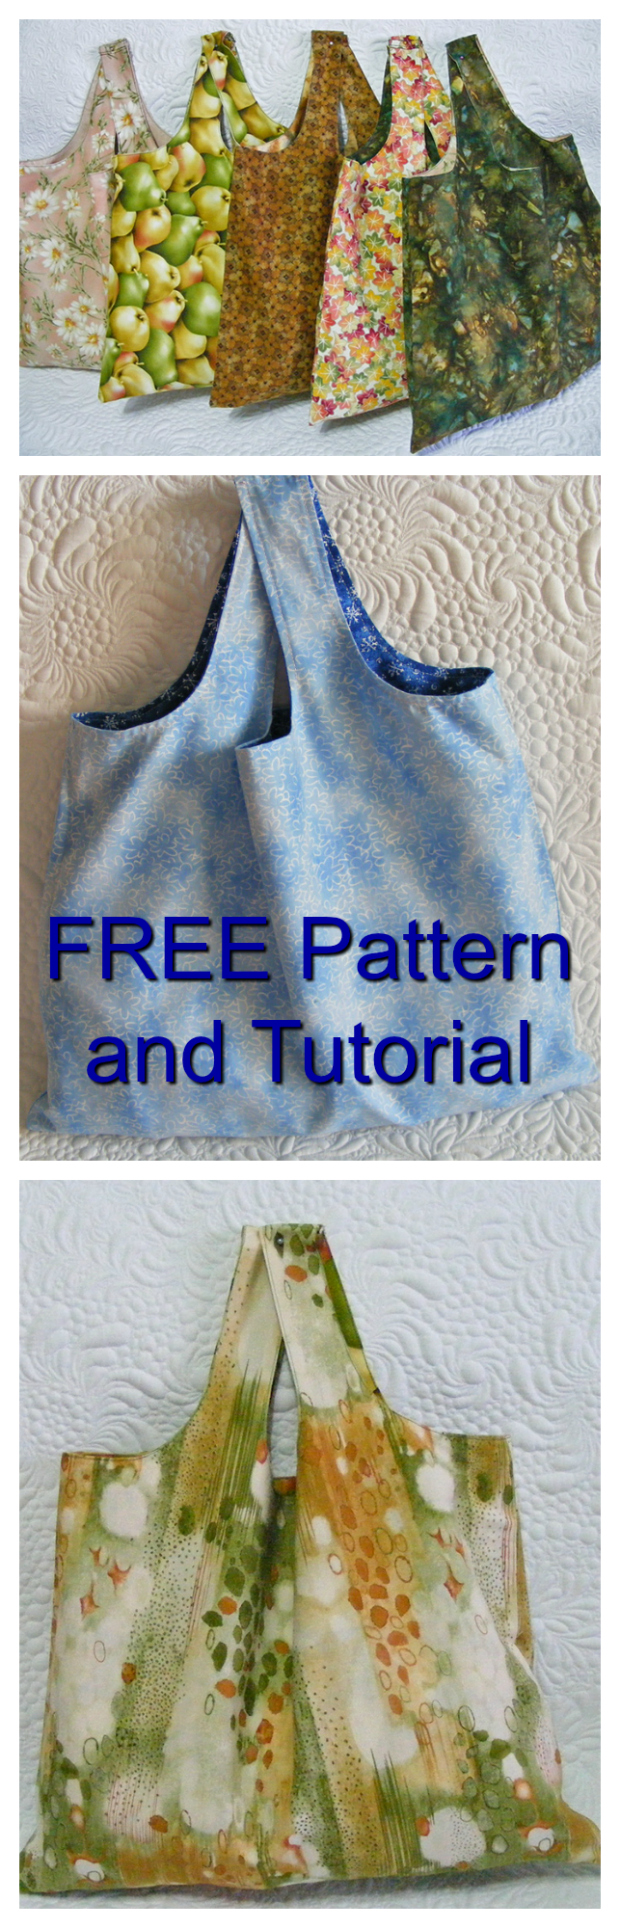 Here is a quick and easy project for a beginner sewer. You can make the Reversible Shopping Bag using the FREE pattern and tutorial. These bags are much stronger than the plastic bags you are given at the supermarkets and by using these bags you get to do your little bit towards saving the planet.